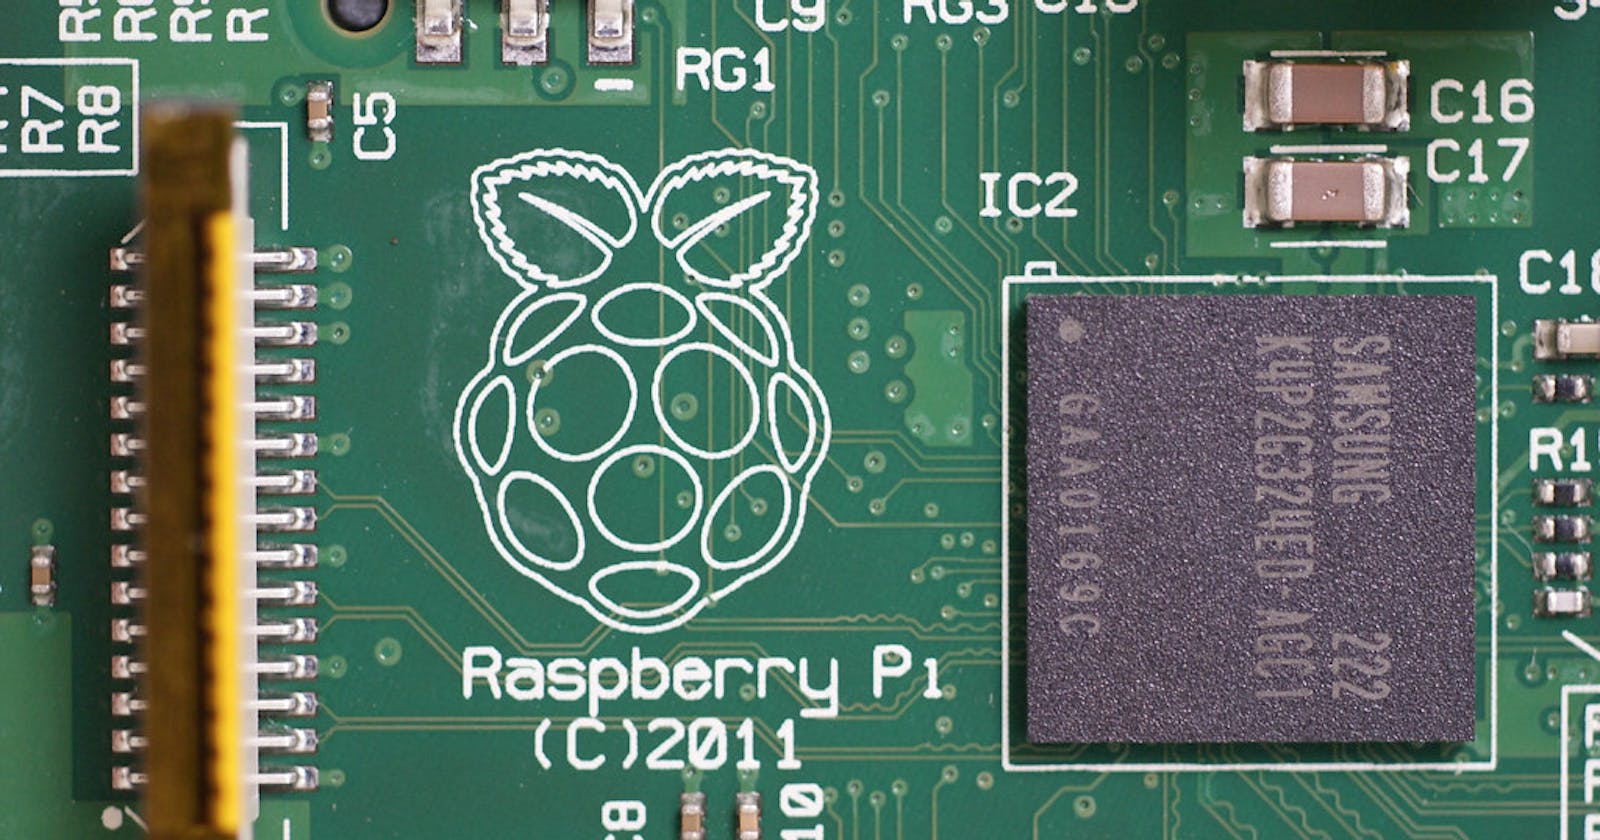 Experiments with Raspberry Pi